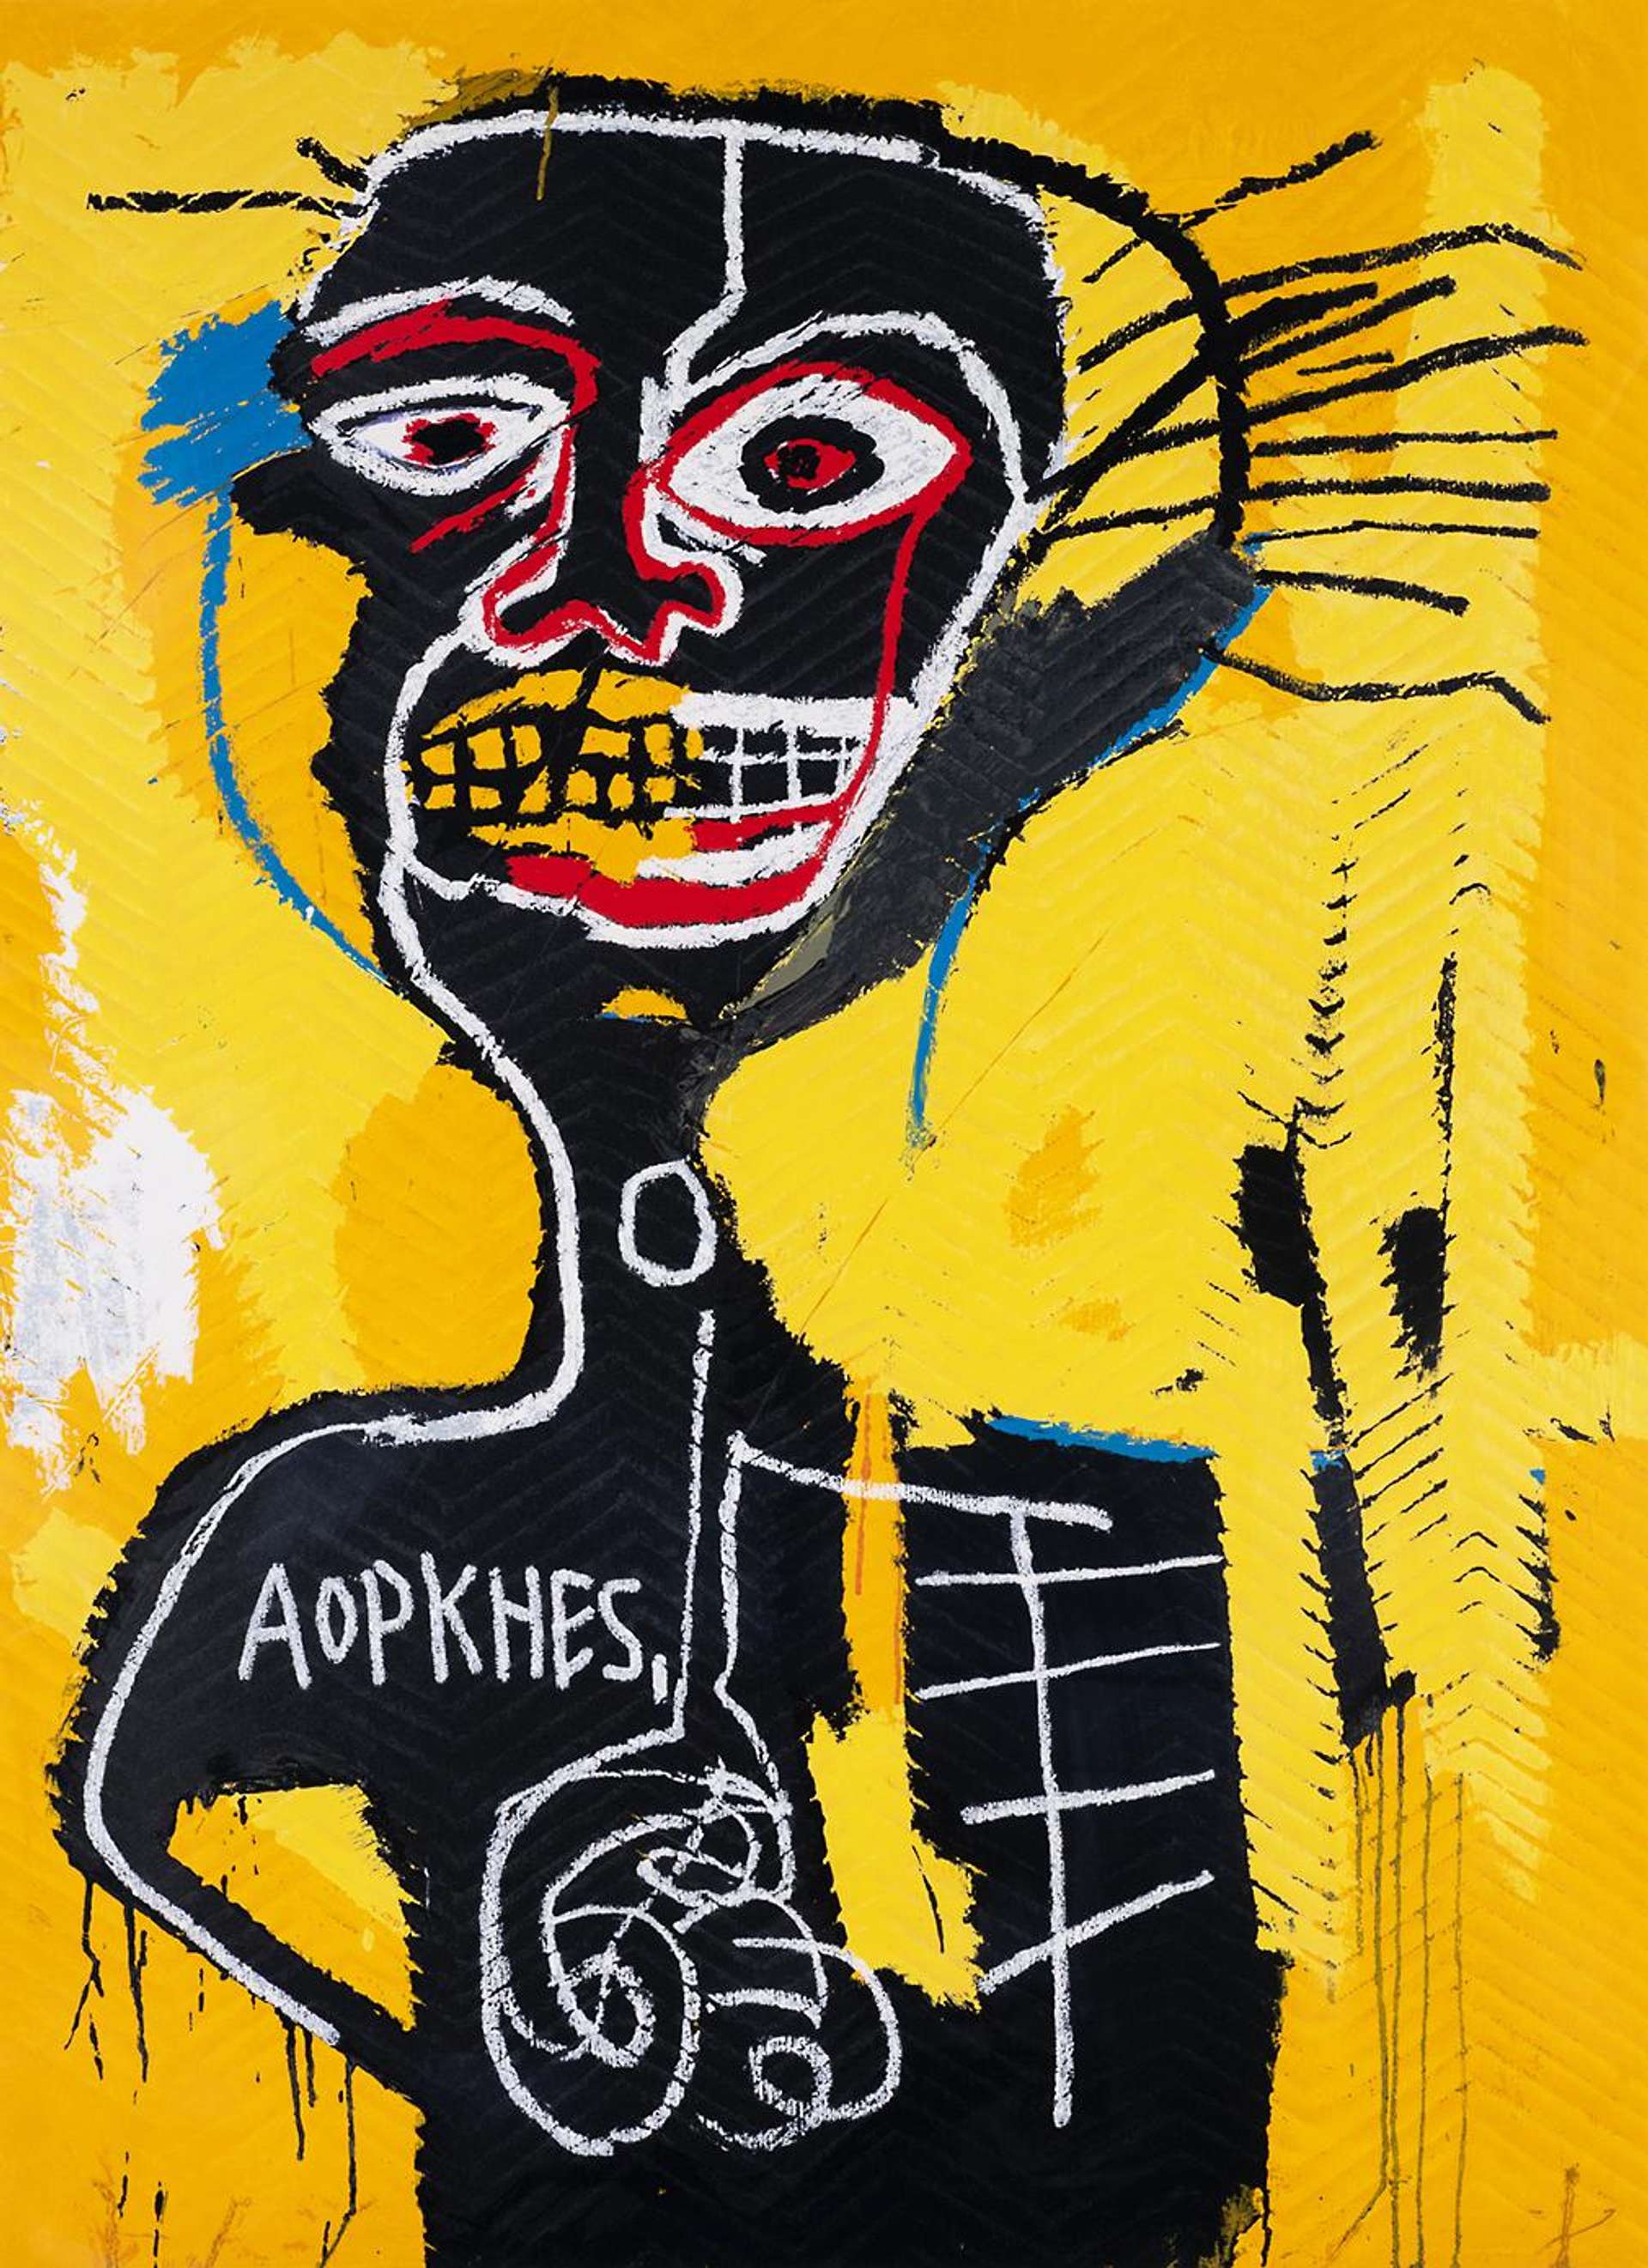 A screenprint of a black figure against a yellow background, with graphic outlined facial features.